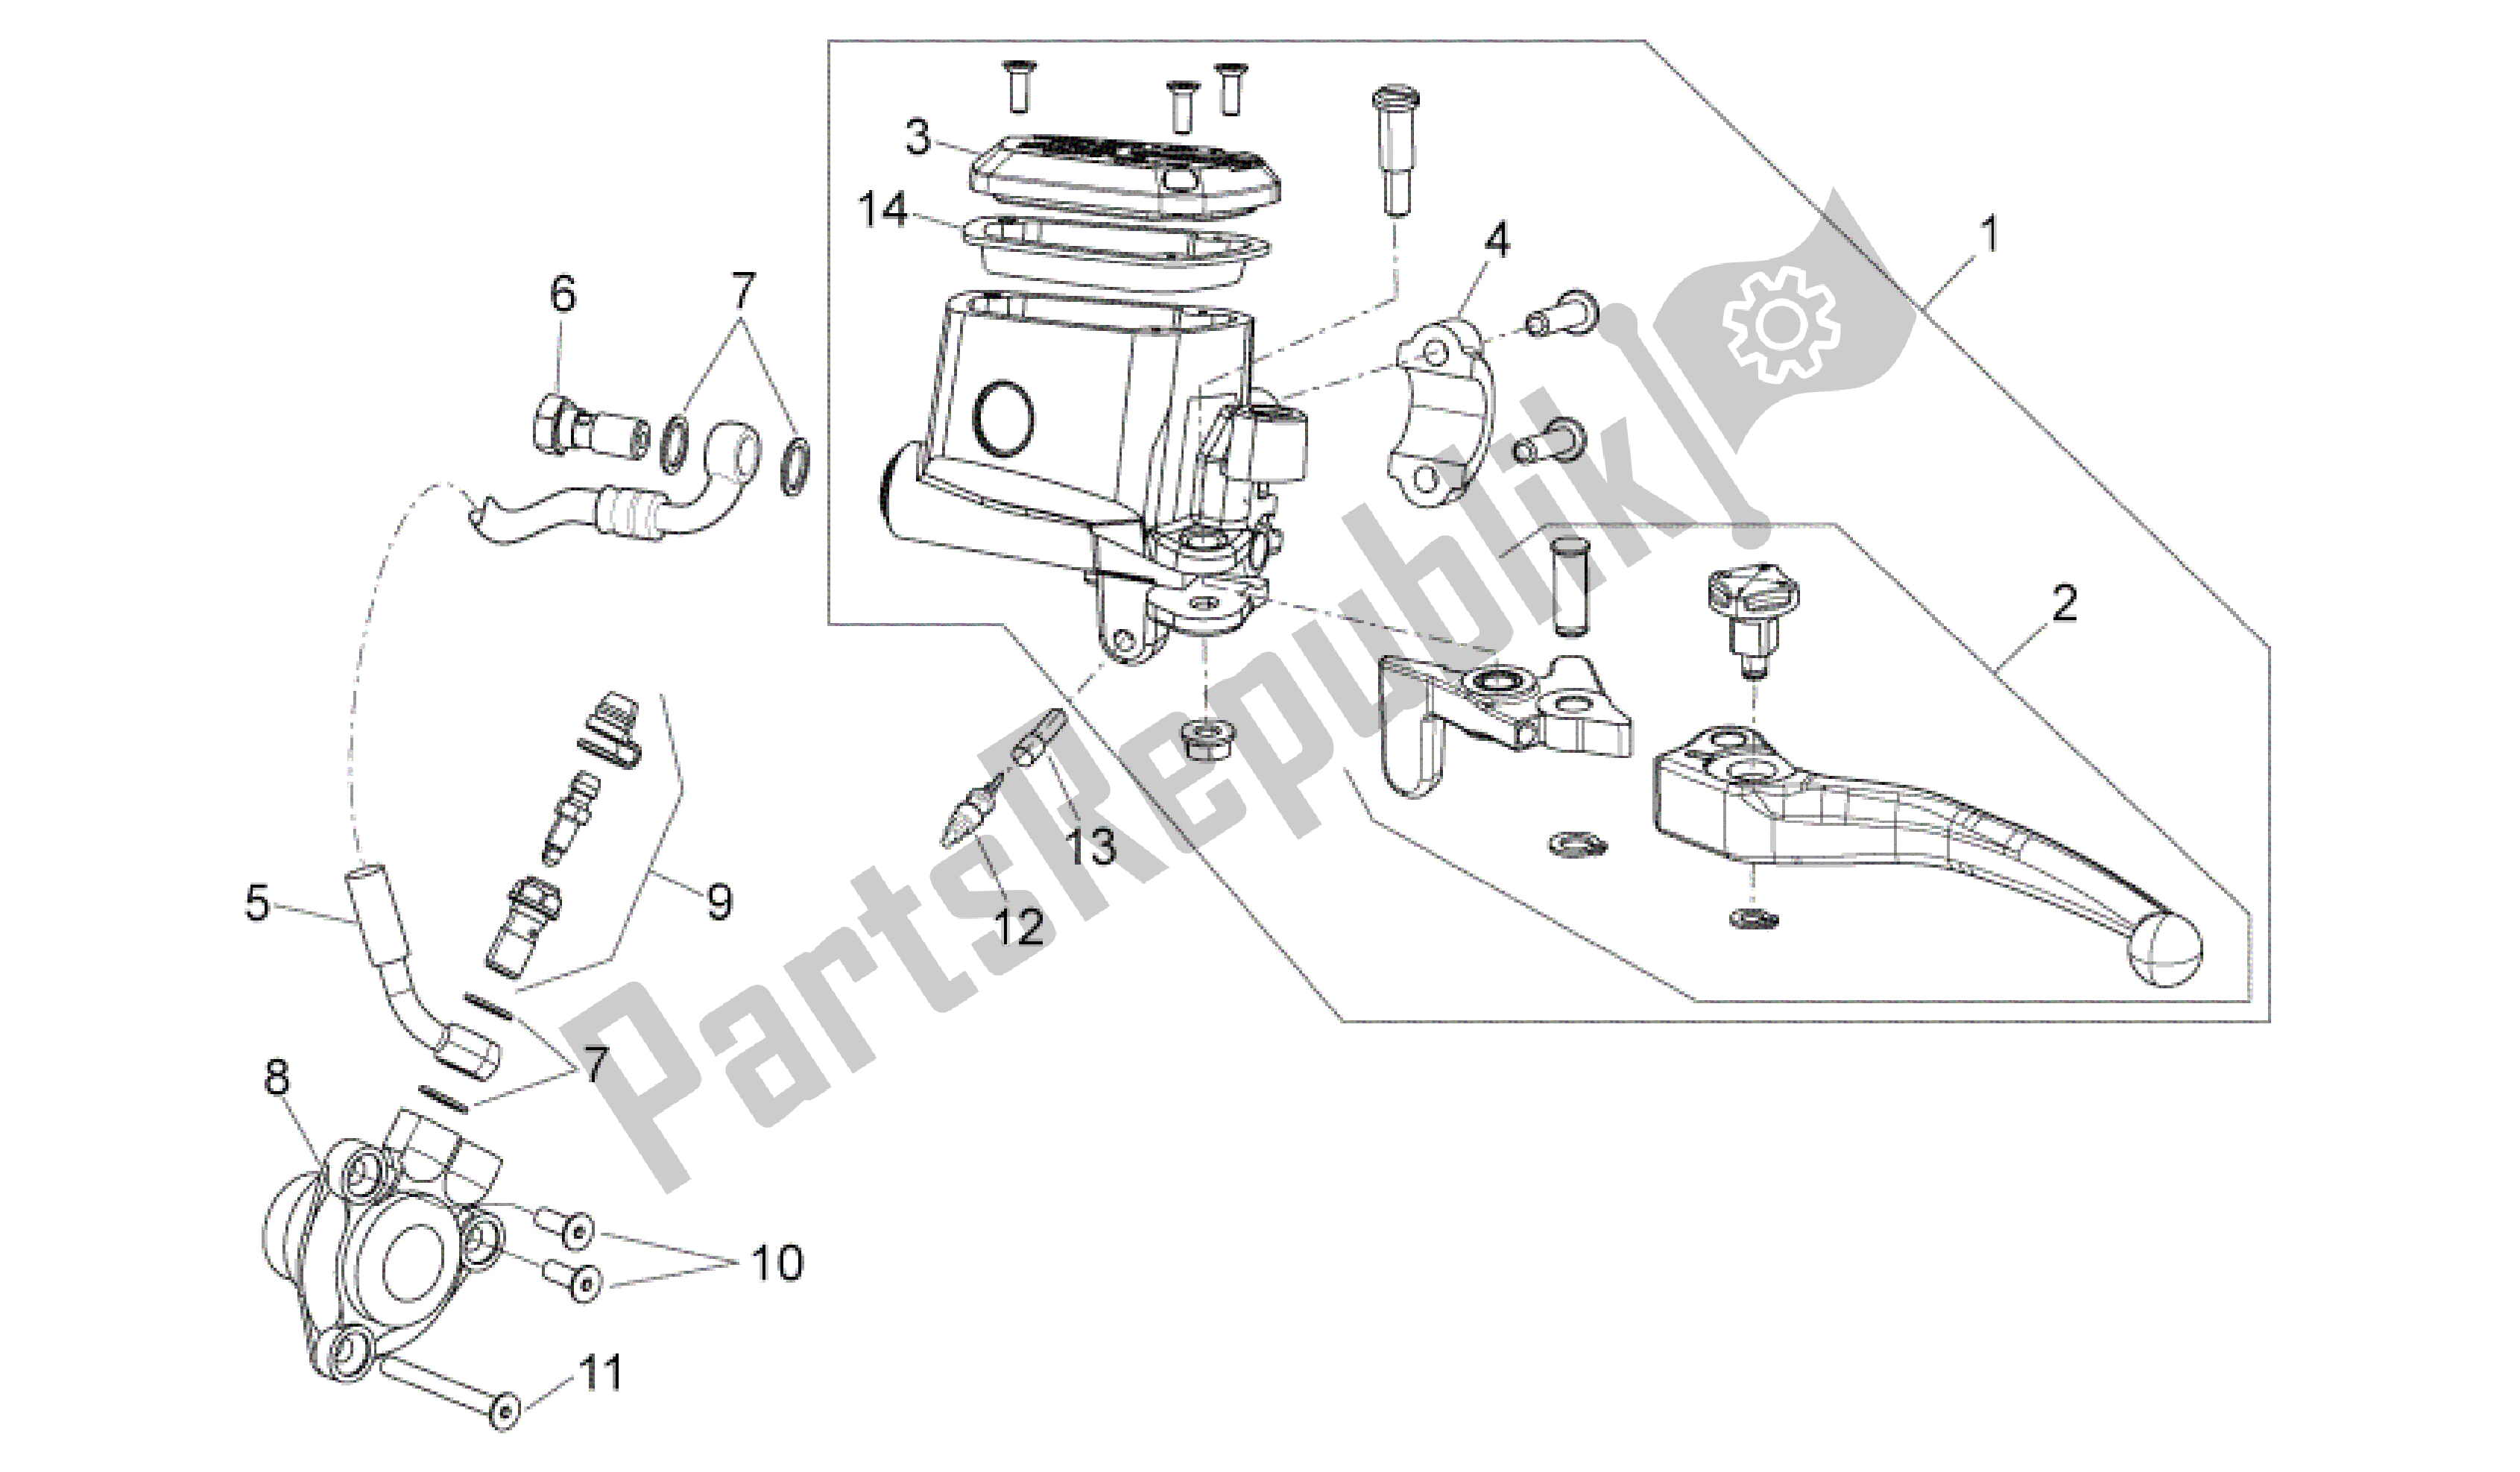 All parts for the Clutch Pump of the Aprilia Shiver 750 2009